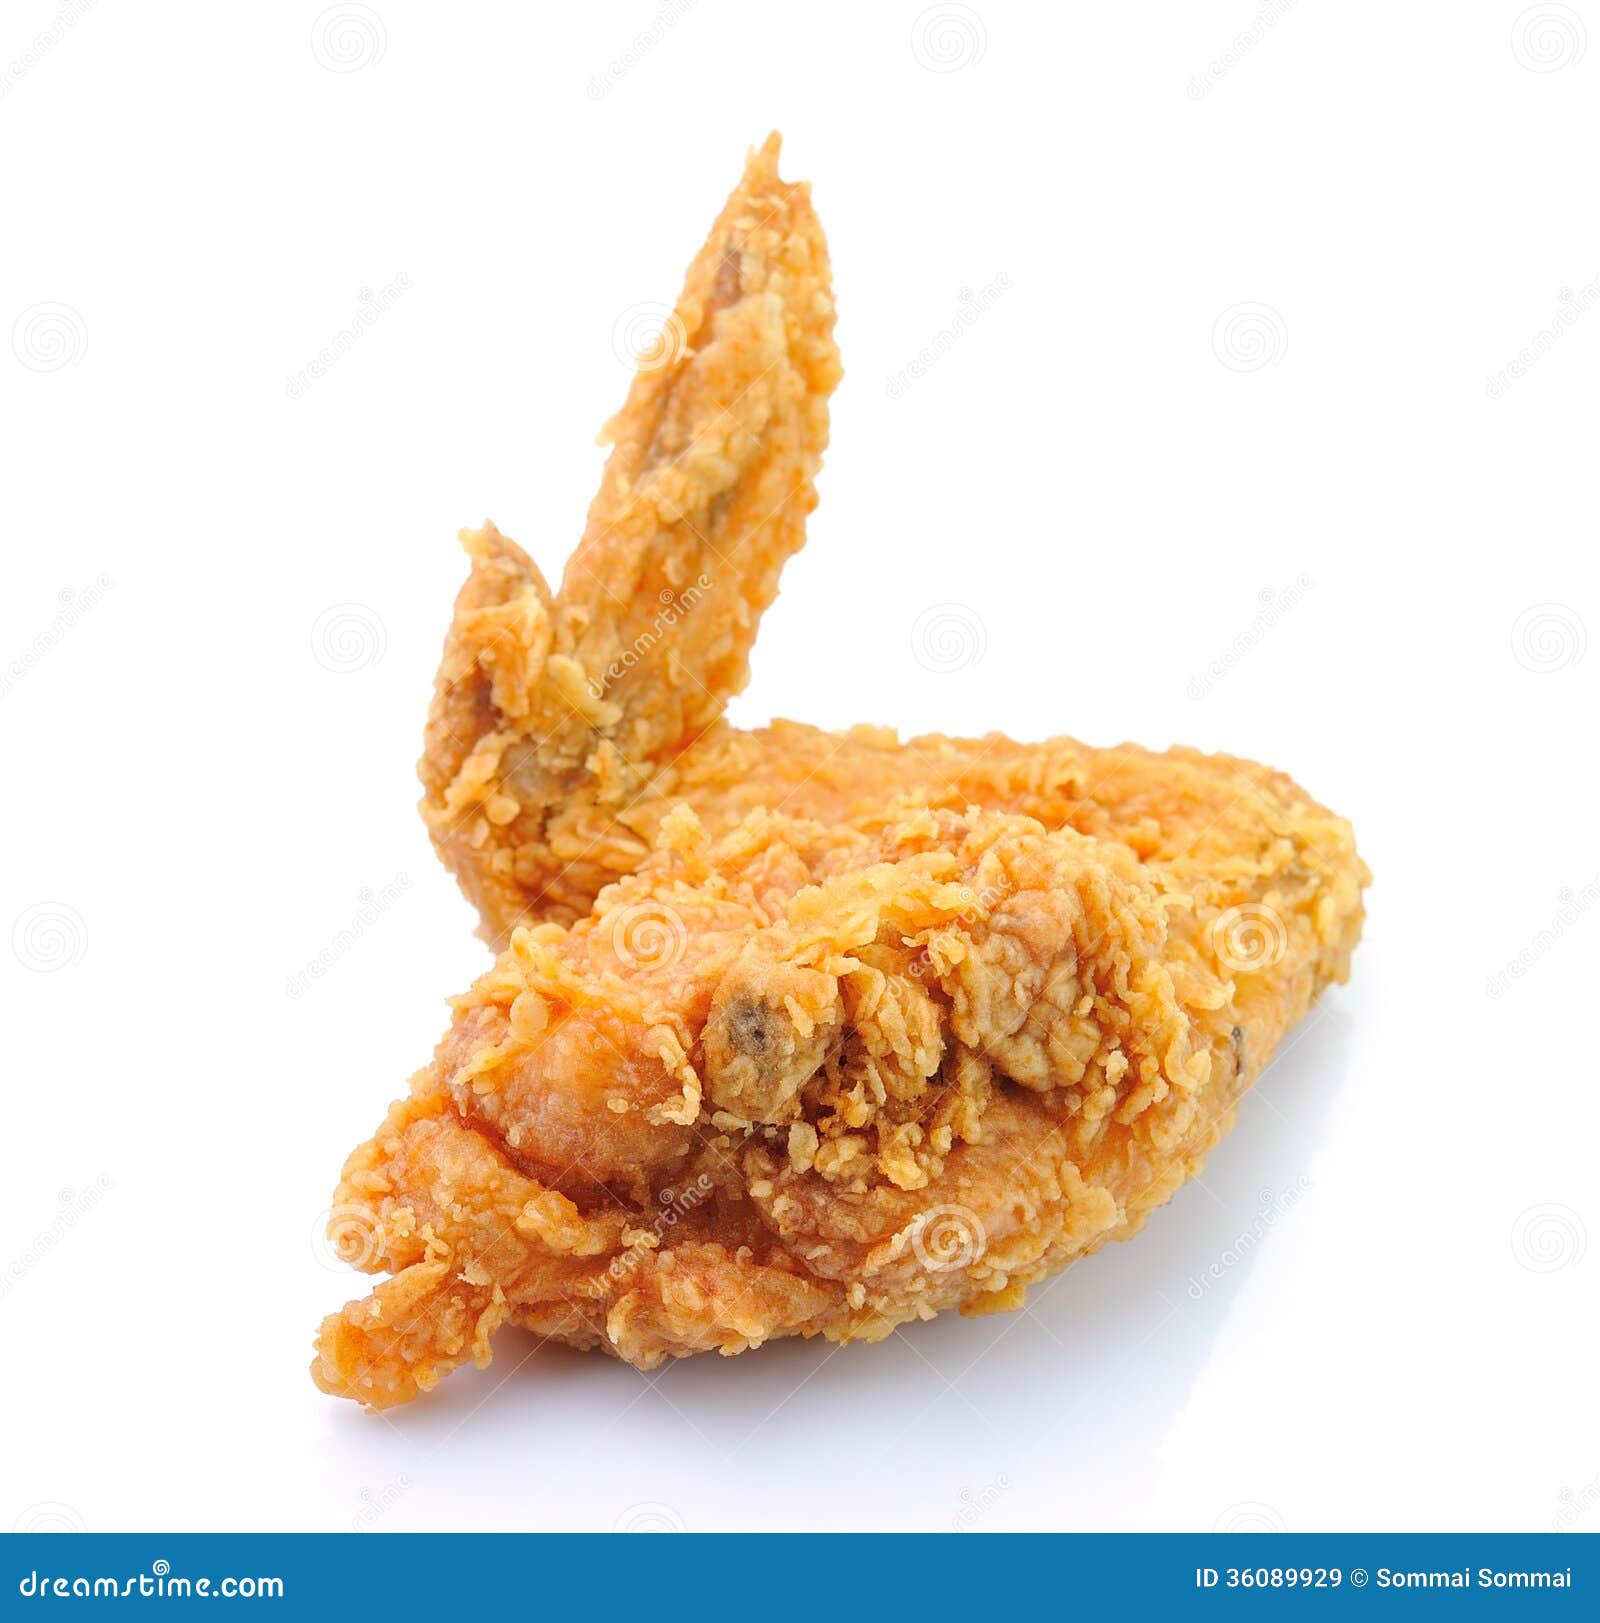 clipart fried chicken wings - photo #14